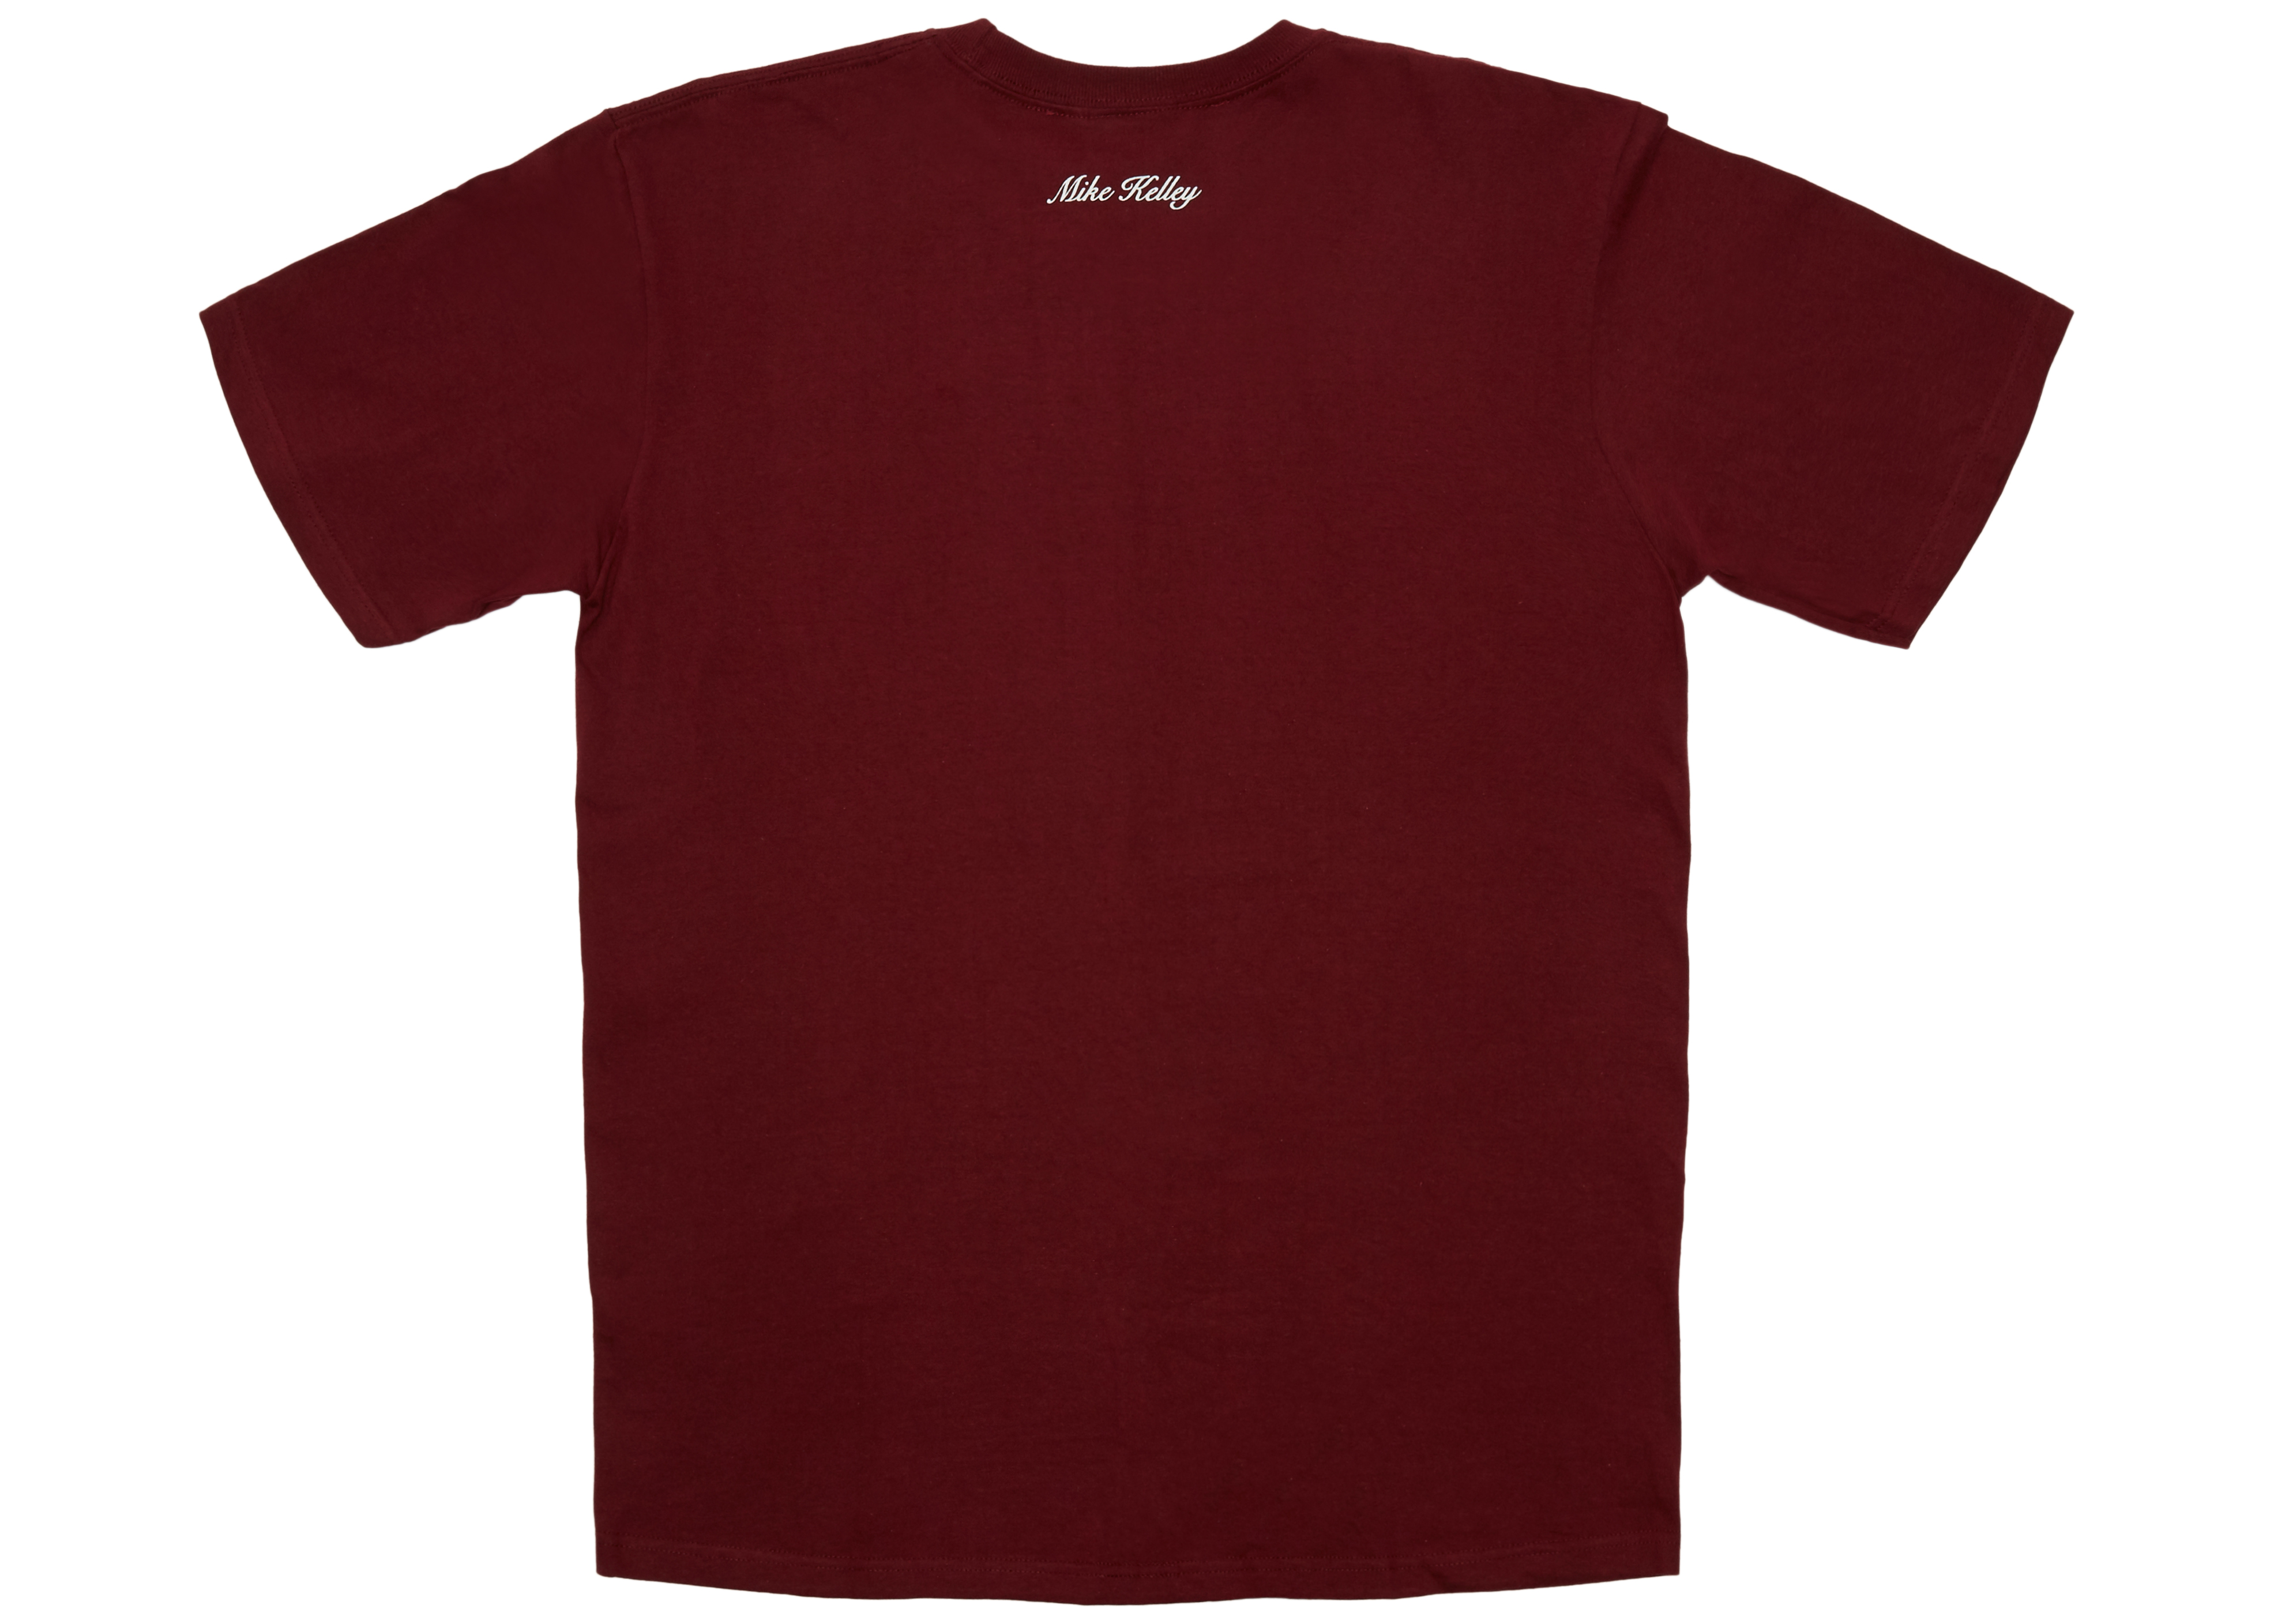 Supreme Mike Kelley The Empire State Building Tee Burgundy